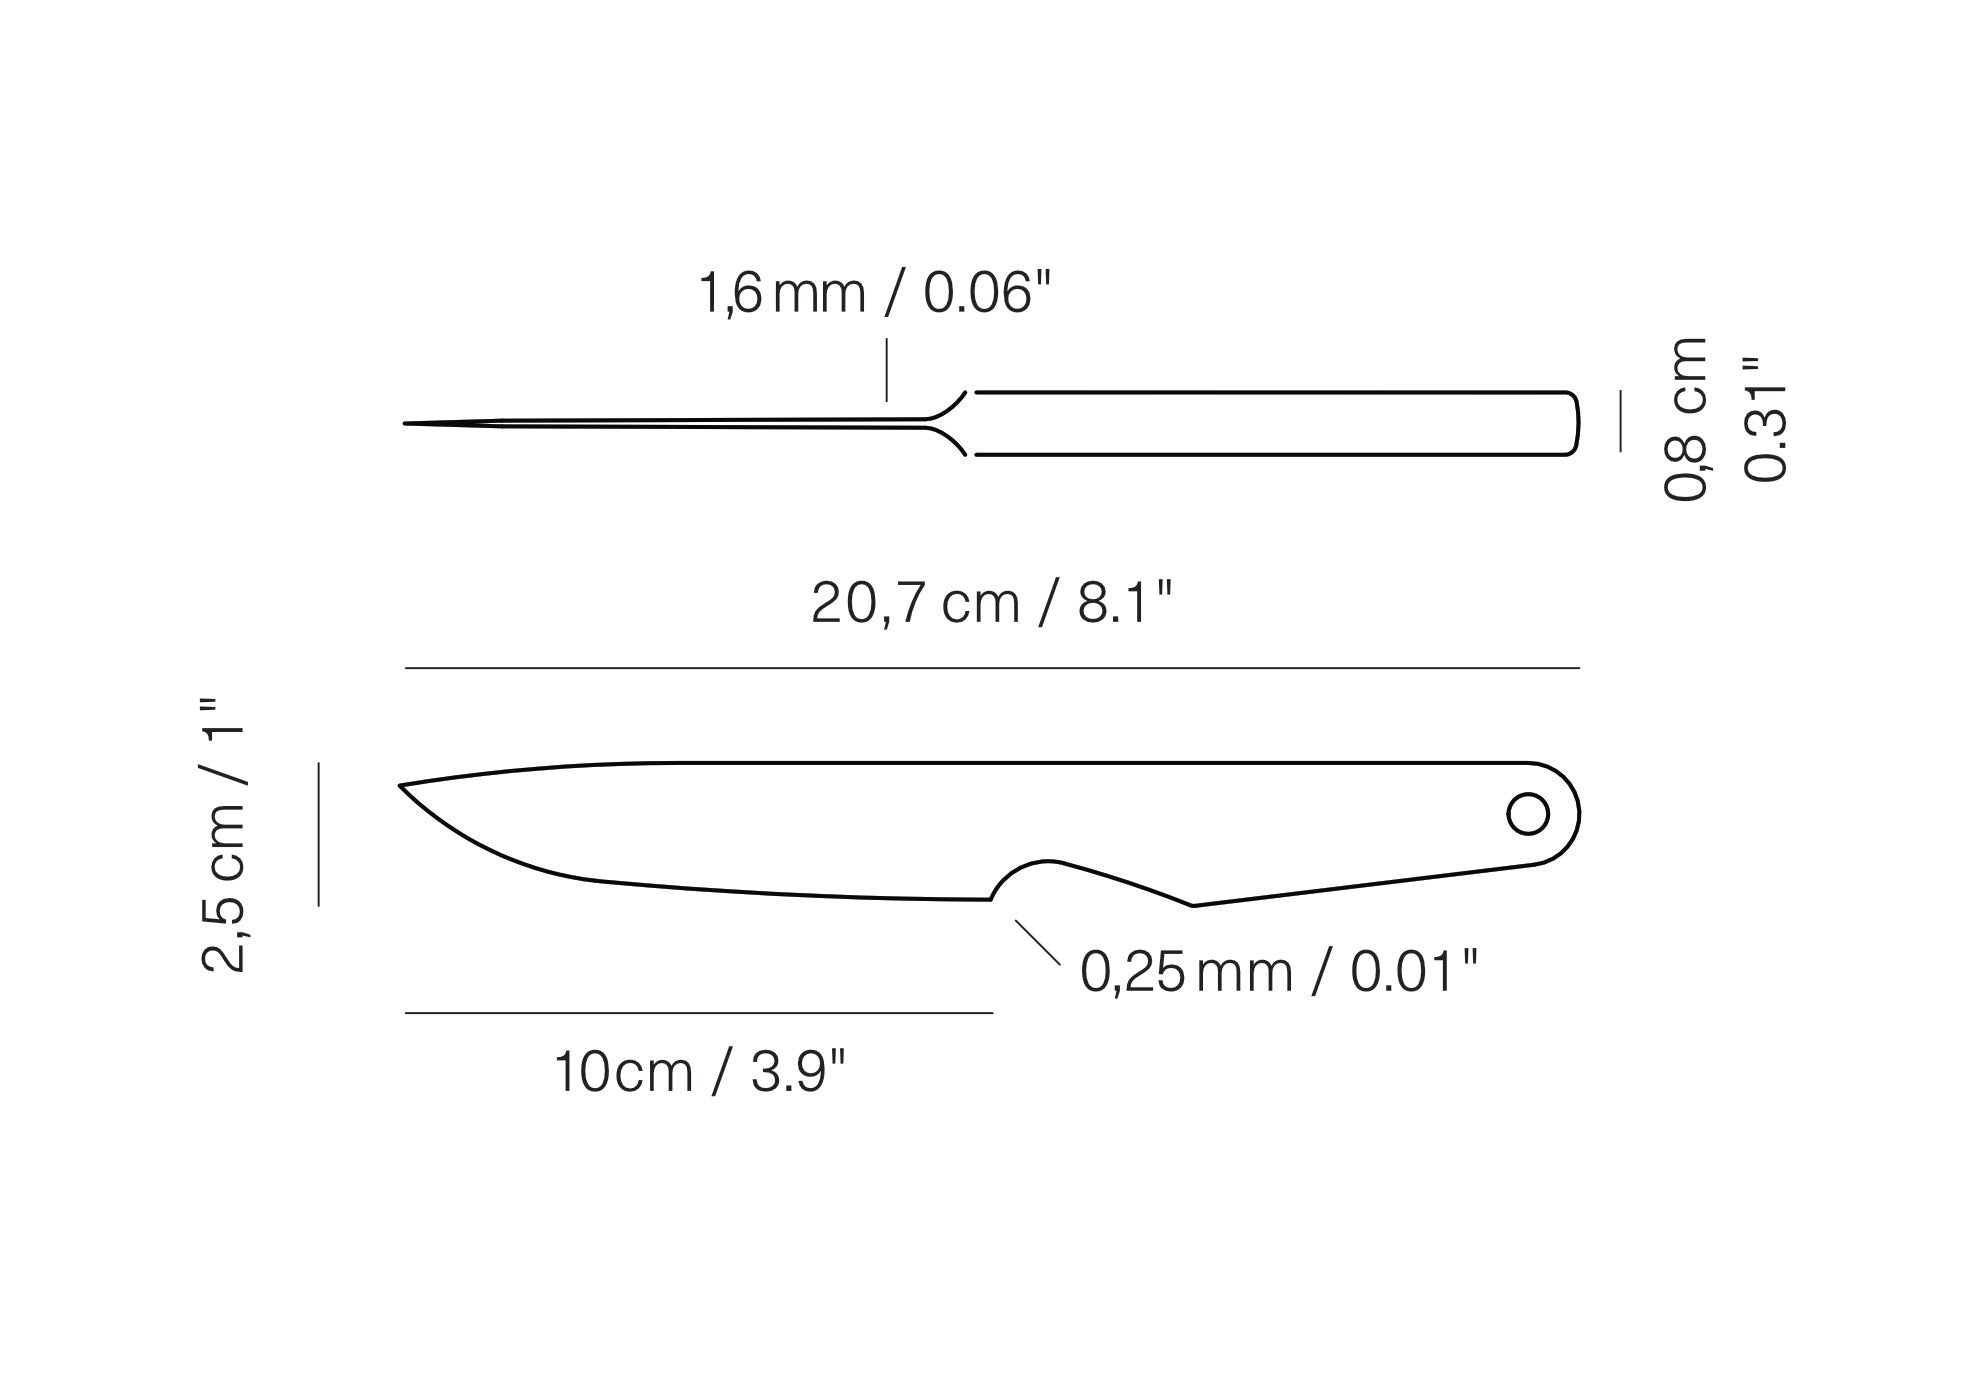 Veark - PRK10 Forged Paring Knife